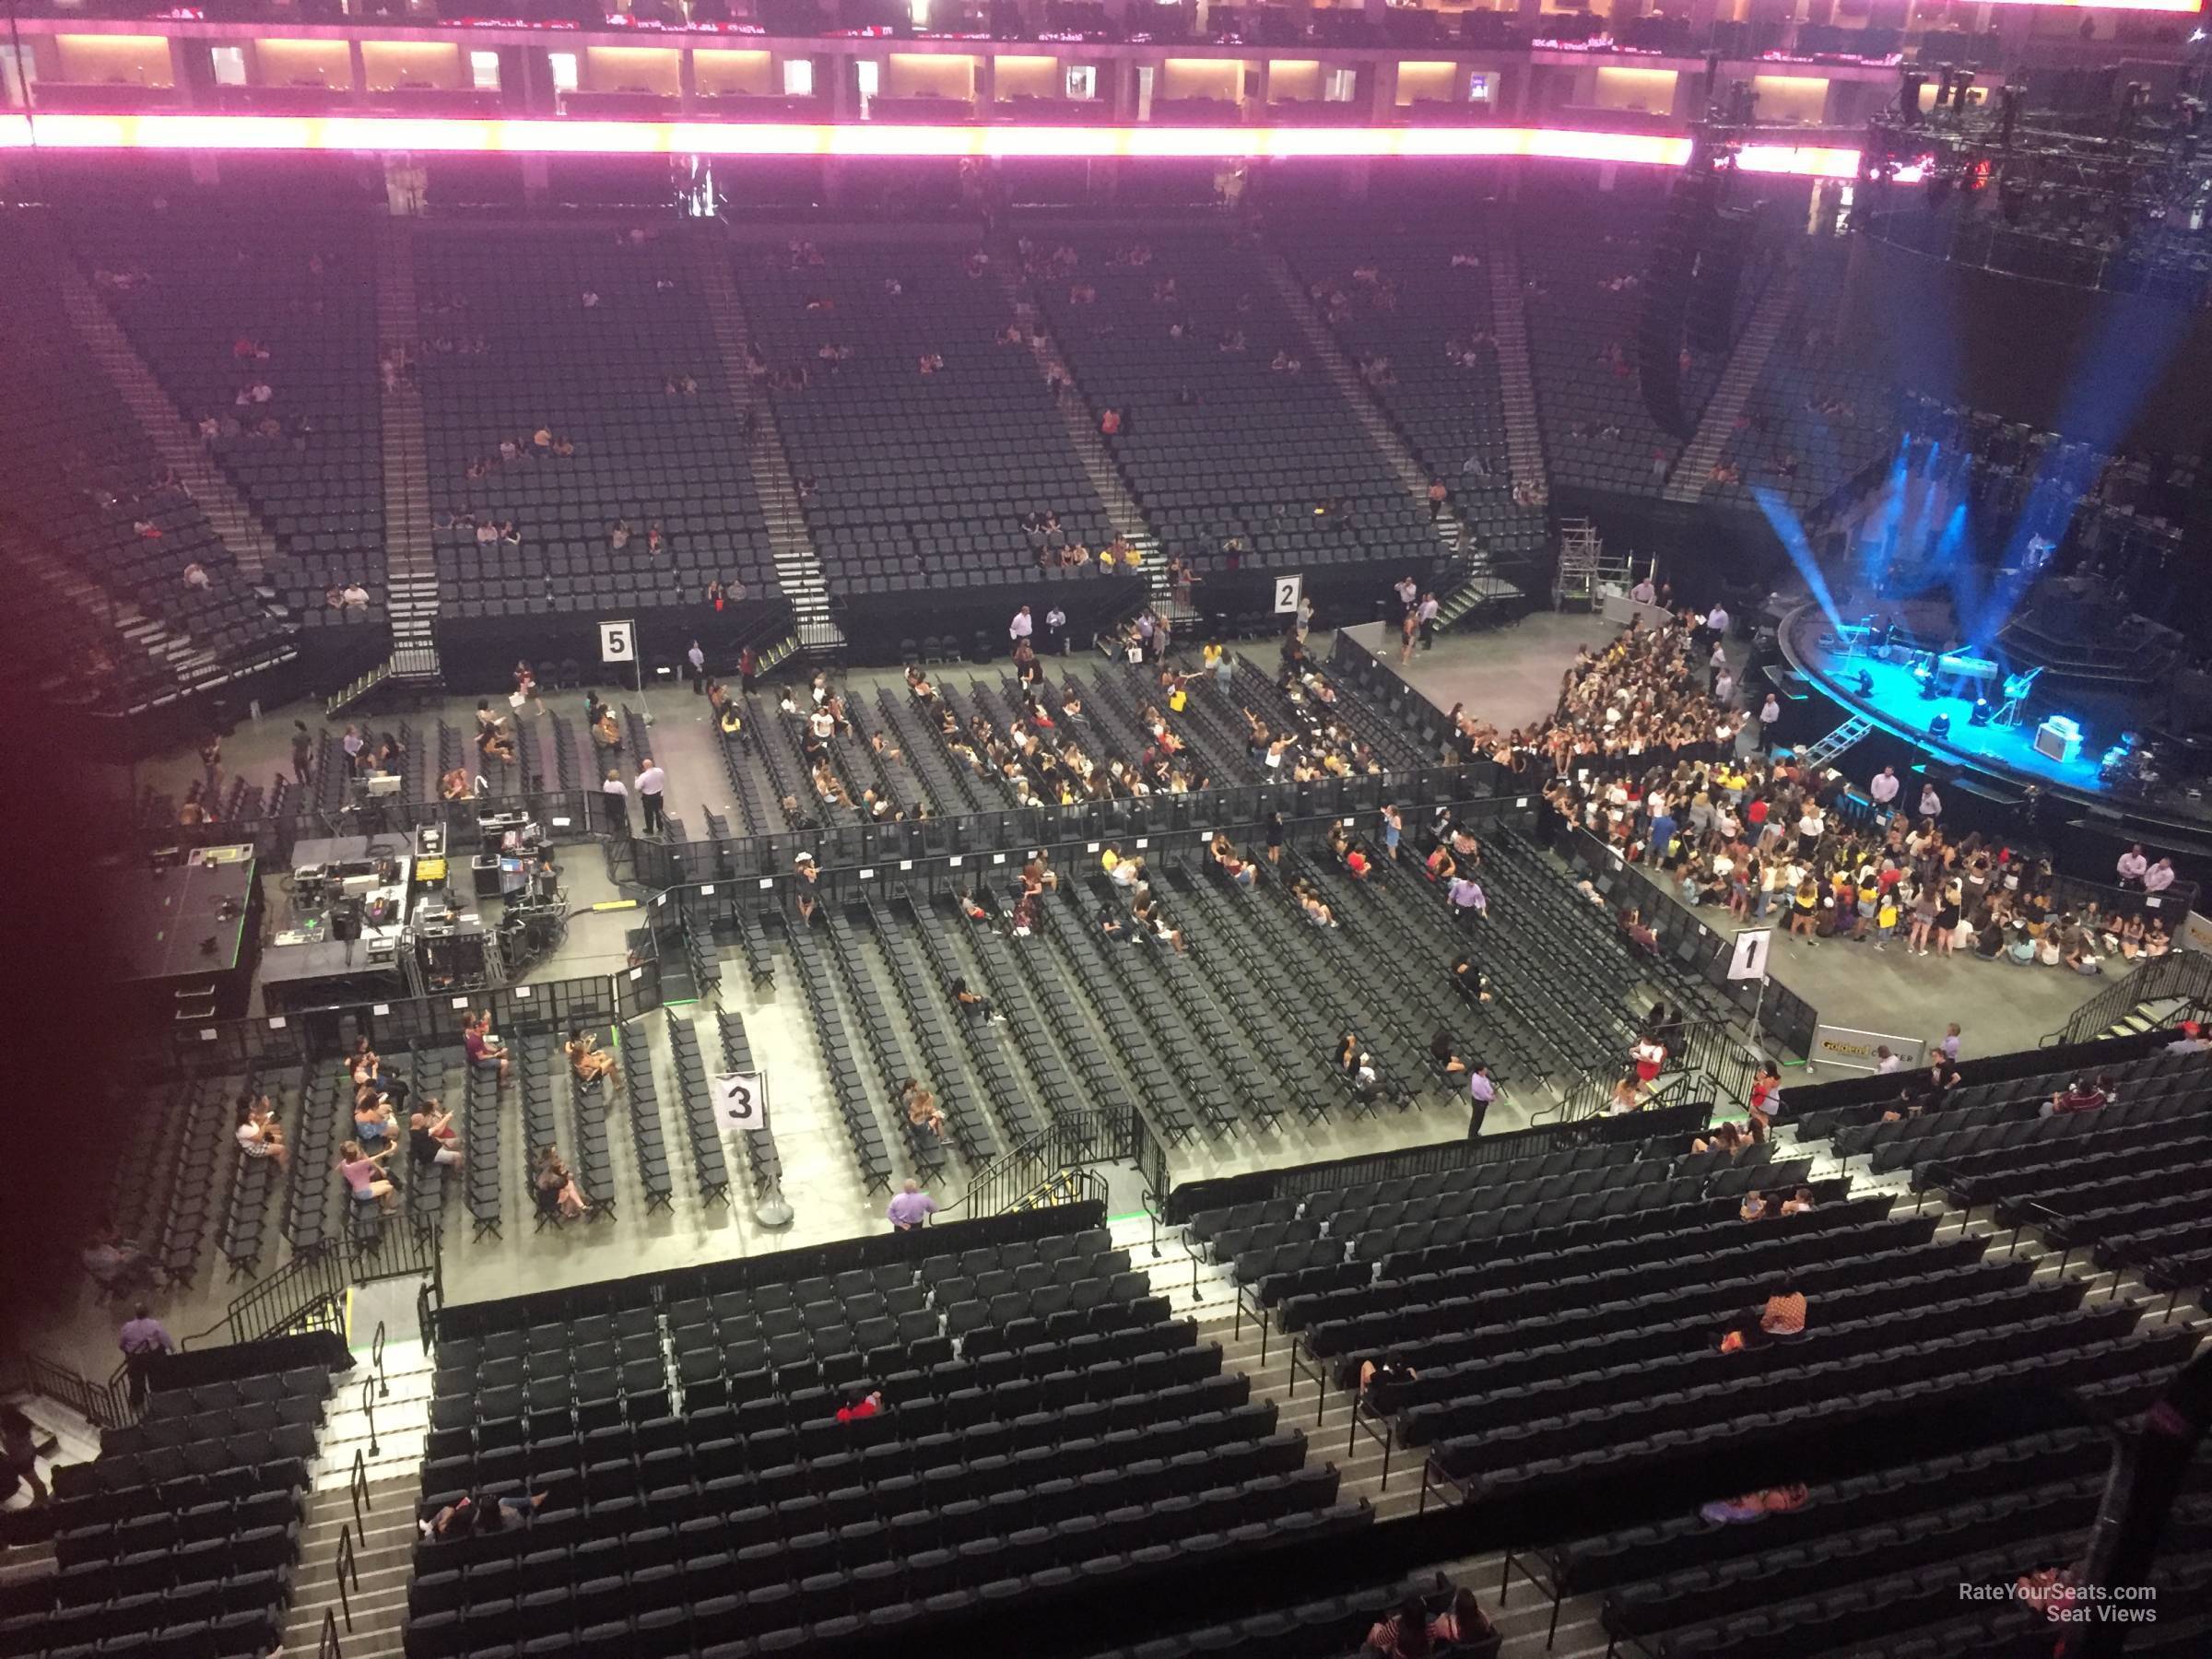 Section 206 at Golden 1 Center for Concerts